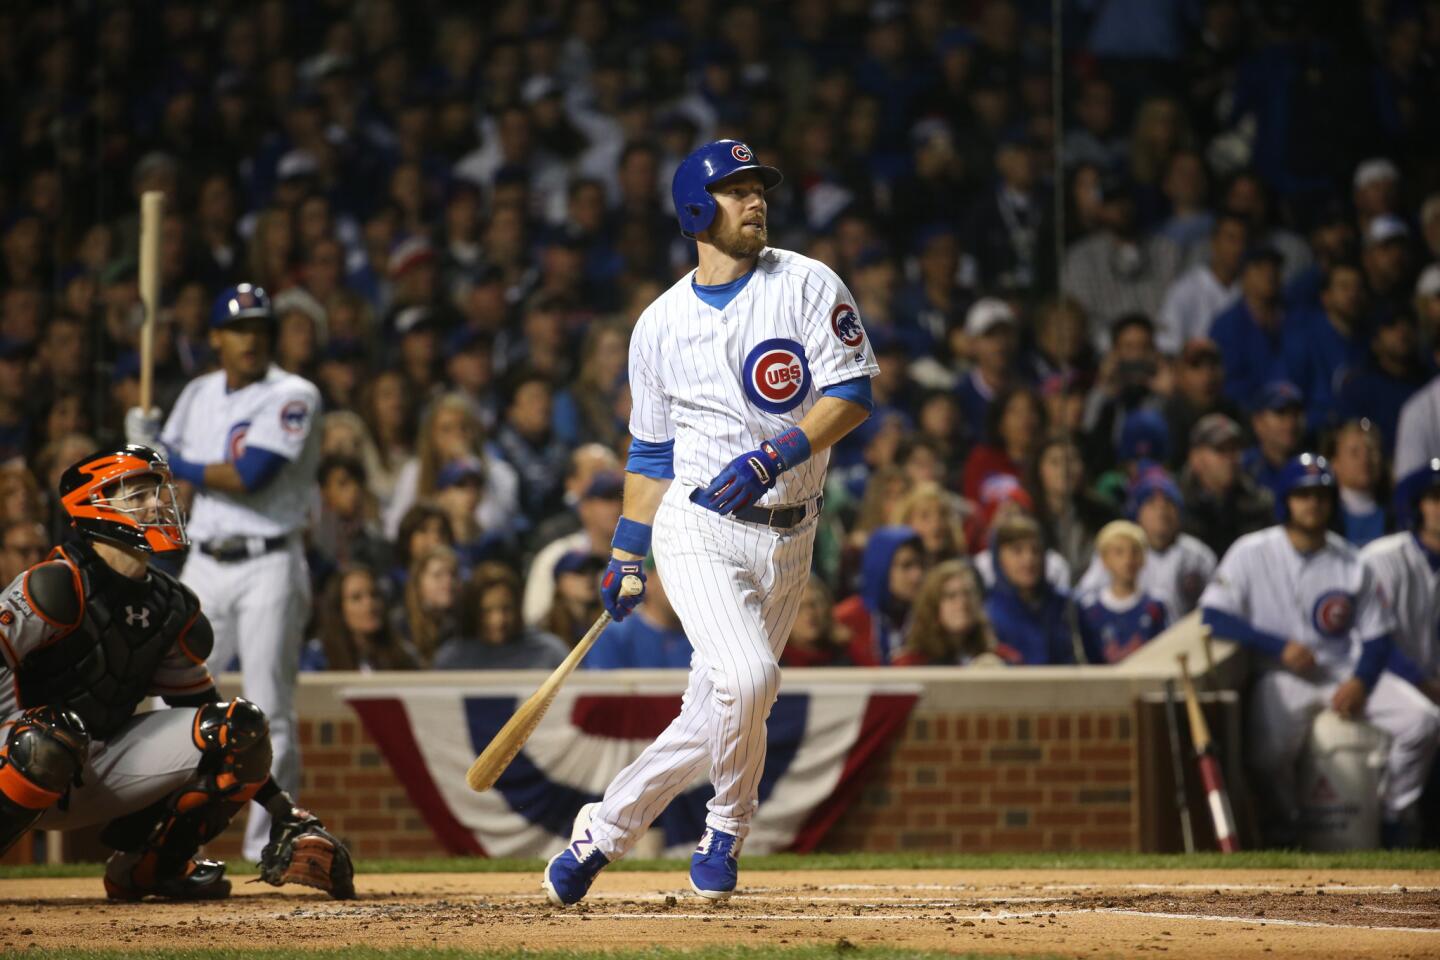 NLDS Game 2: Cubs 5, Giants 2